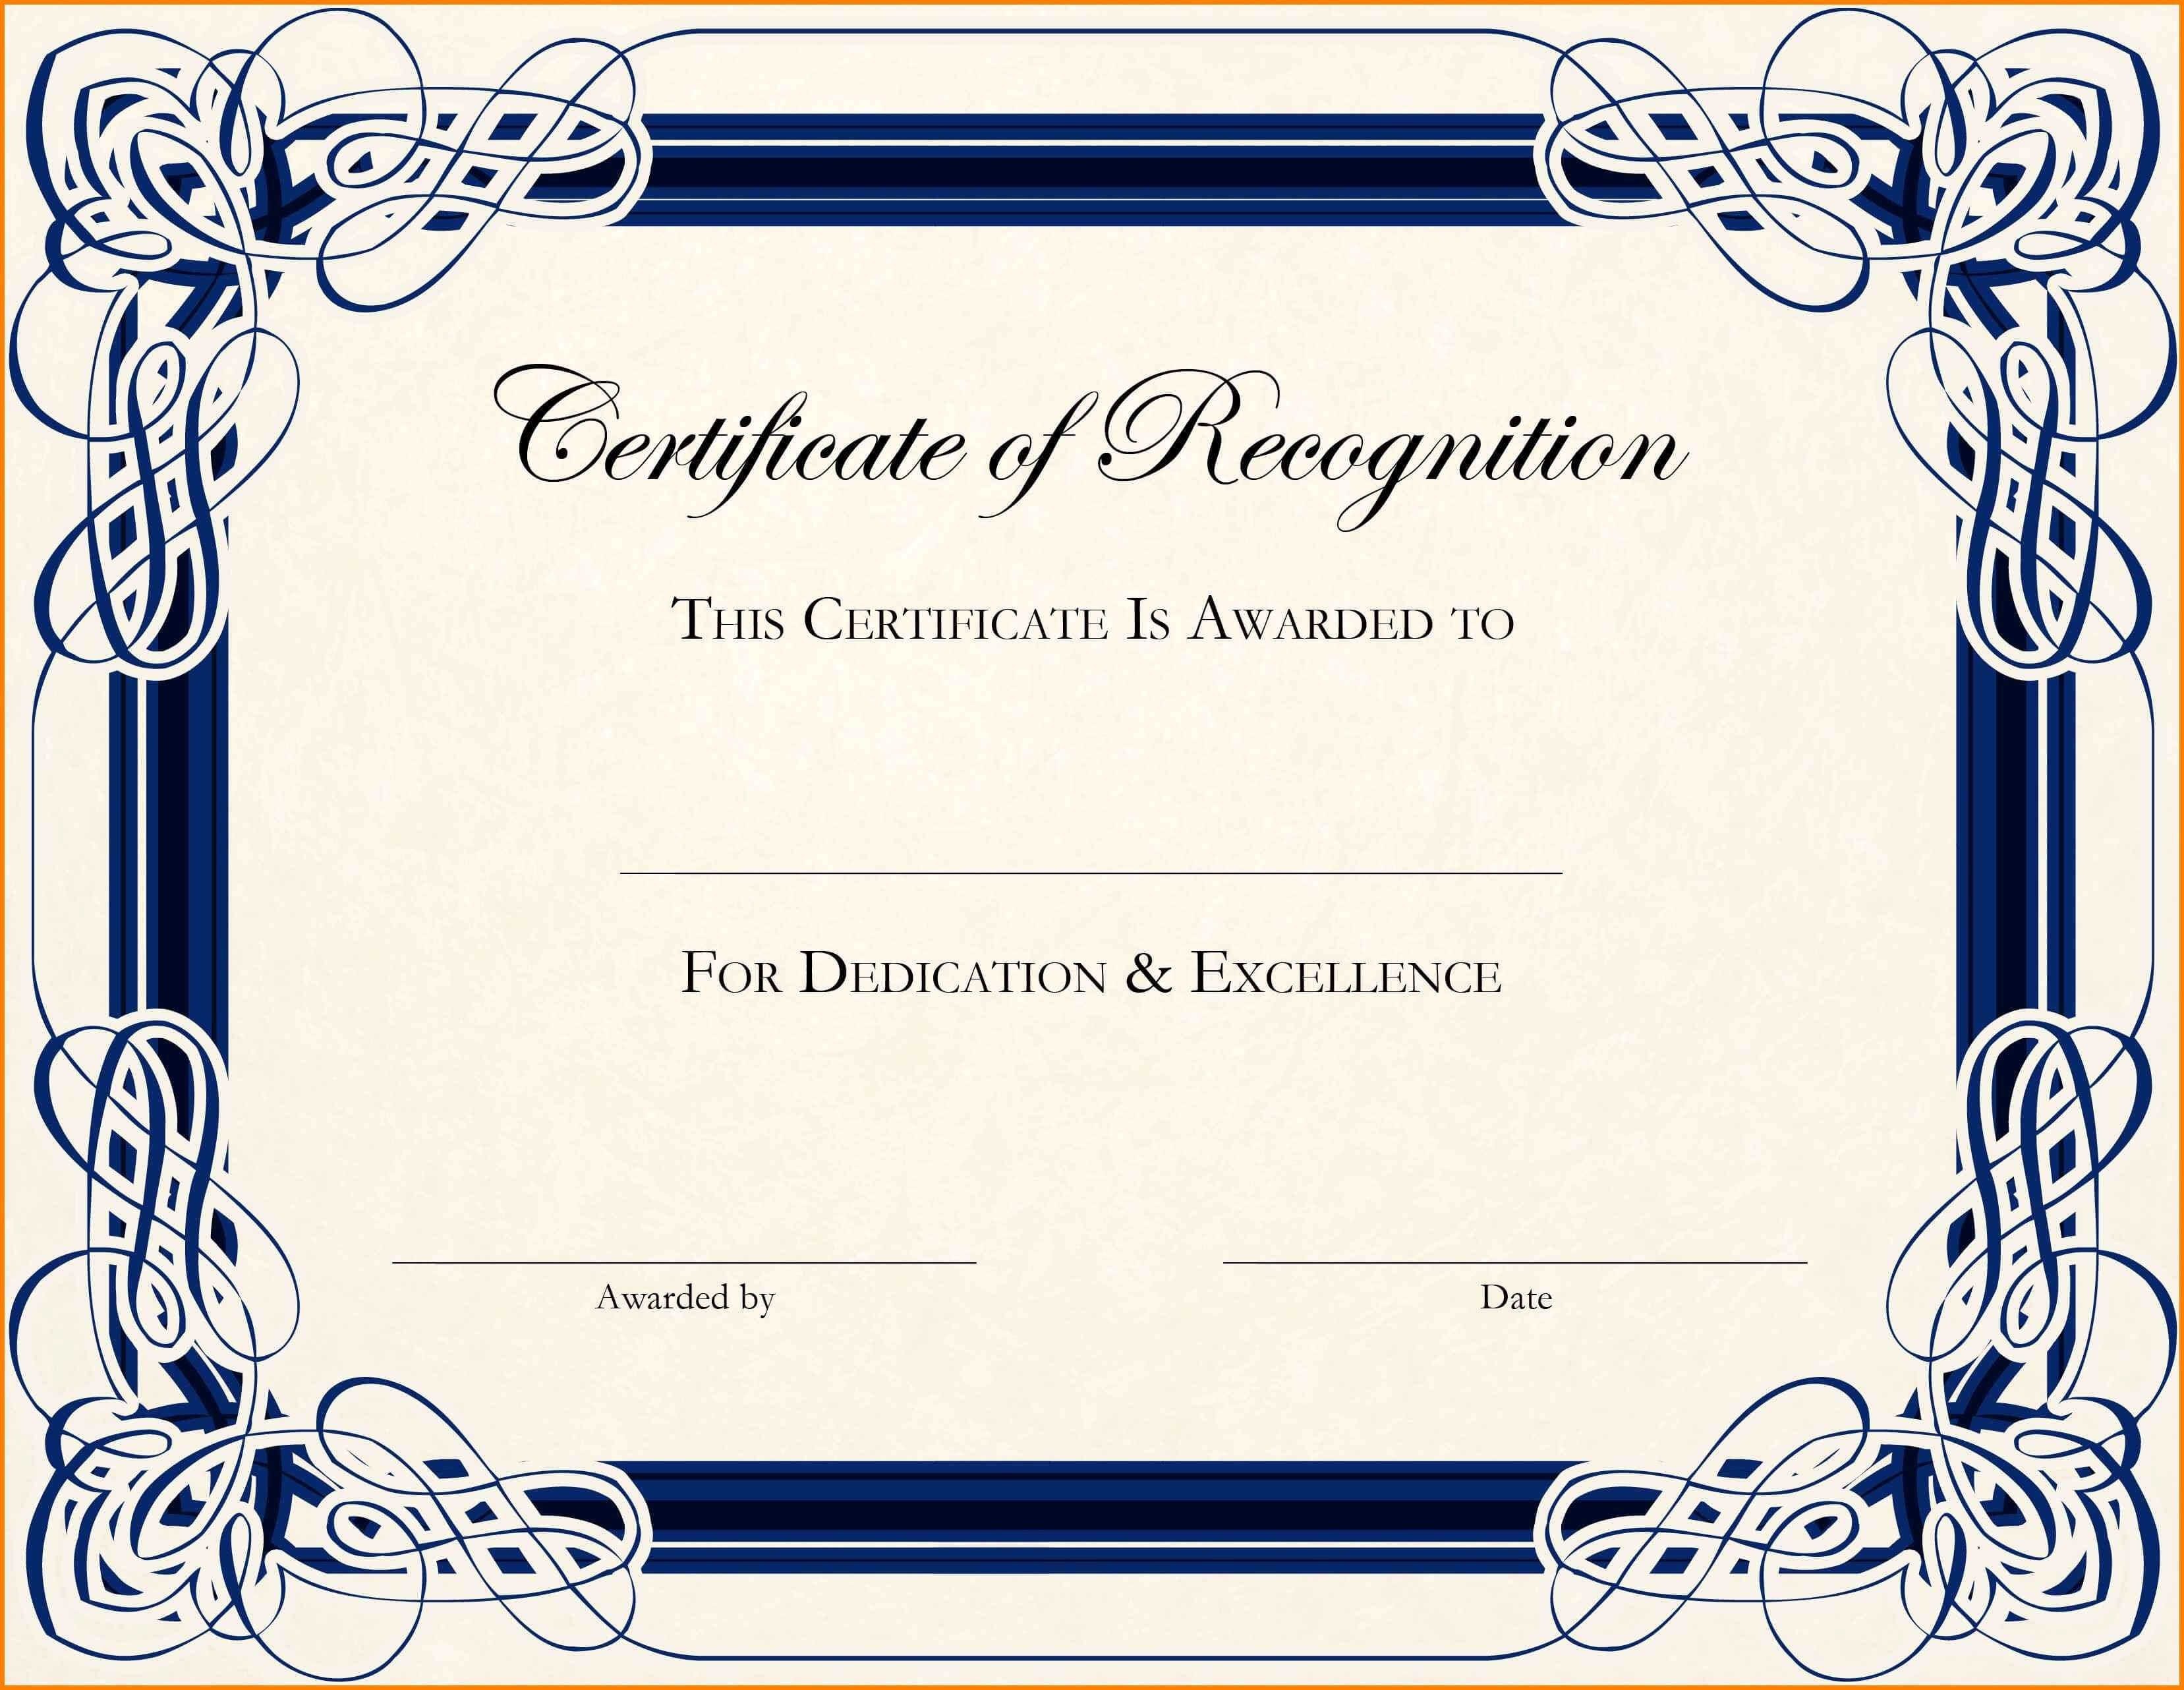 Certificates: Captivating Basic Certificate Template Sample Regarding Certificate Templates For Word Free Downloads